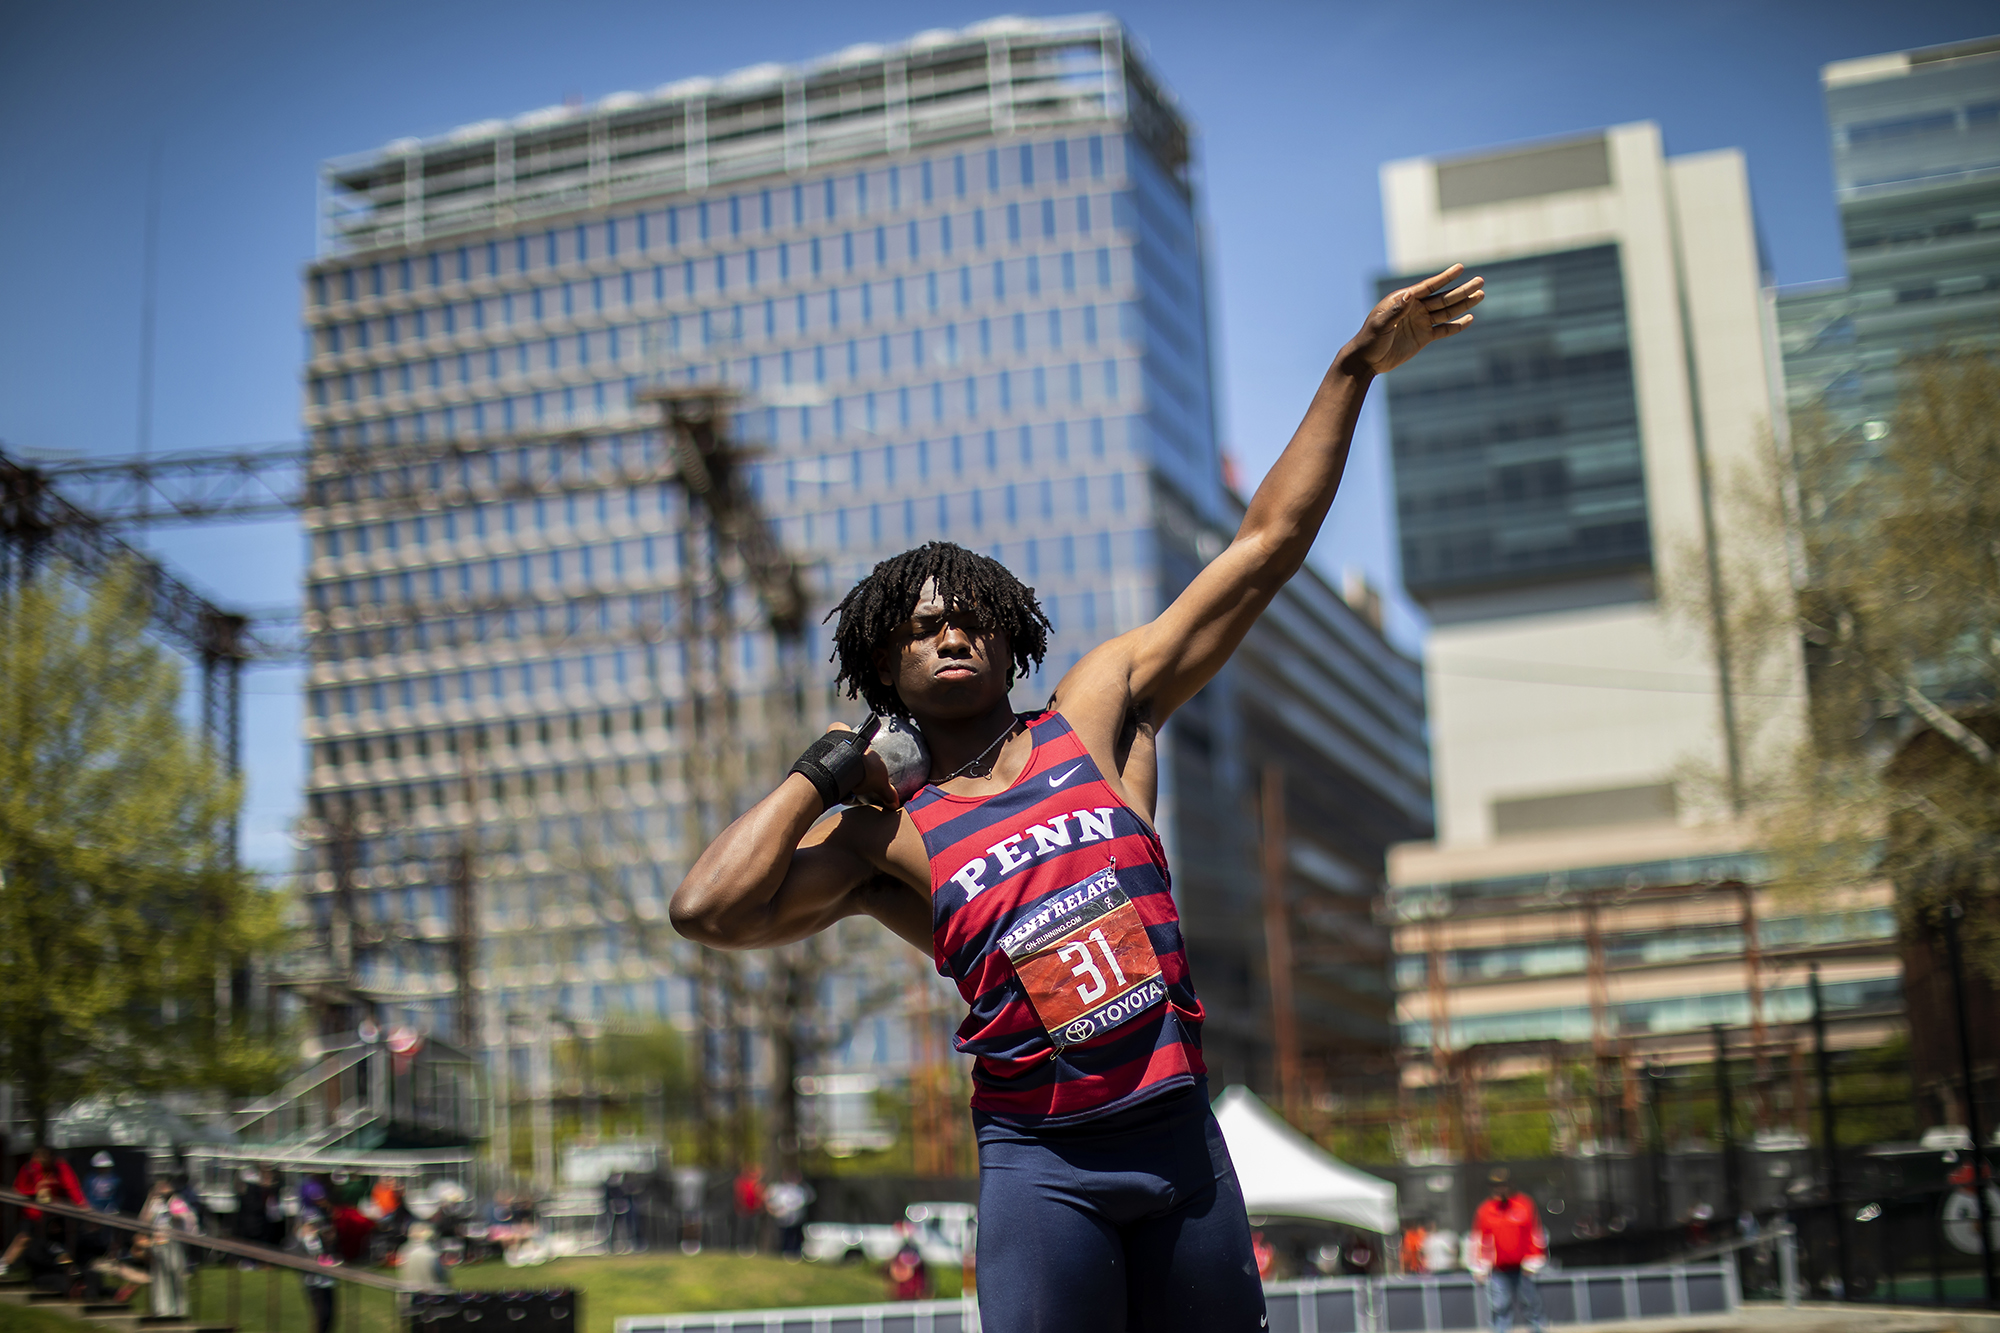 An athlete in a Penn jersey about to throw a shot put.